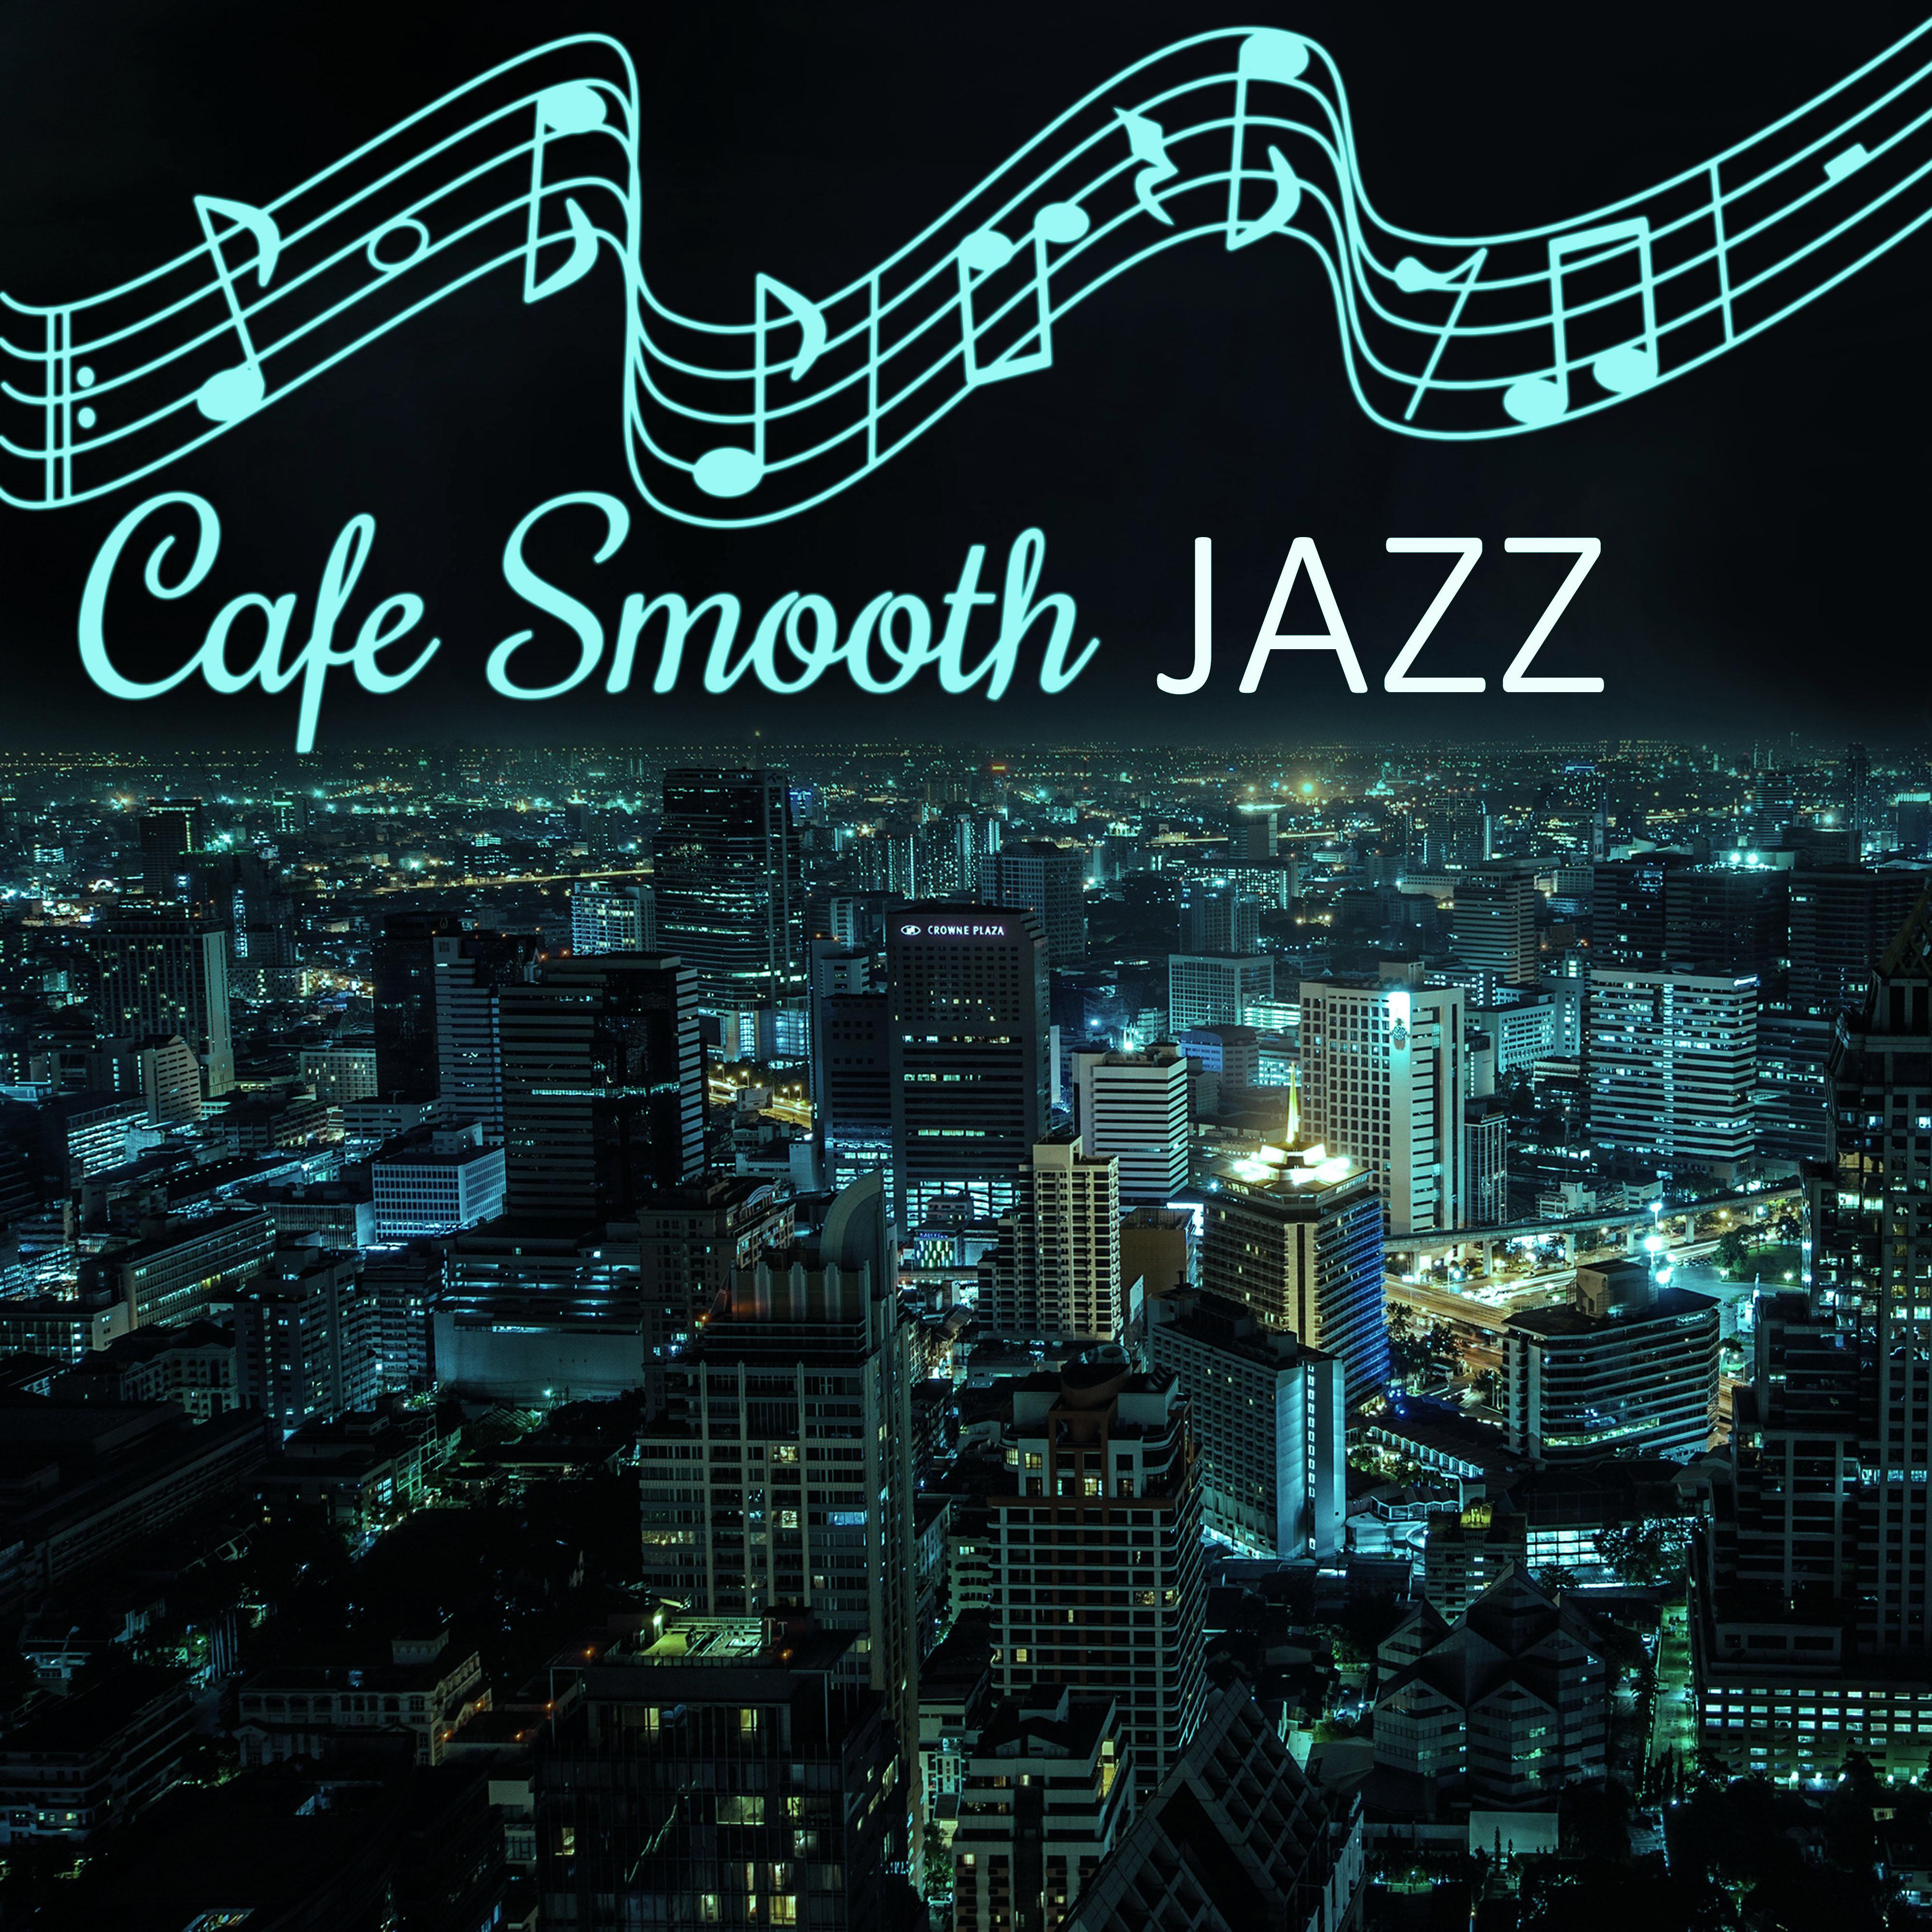 Cafe Smooth Jazz – Beautiful Dinner Time, Free Time With Family, Best Jazz Music for Restaurant, Relaxing Sounds for Family Dinner